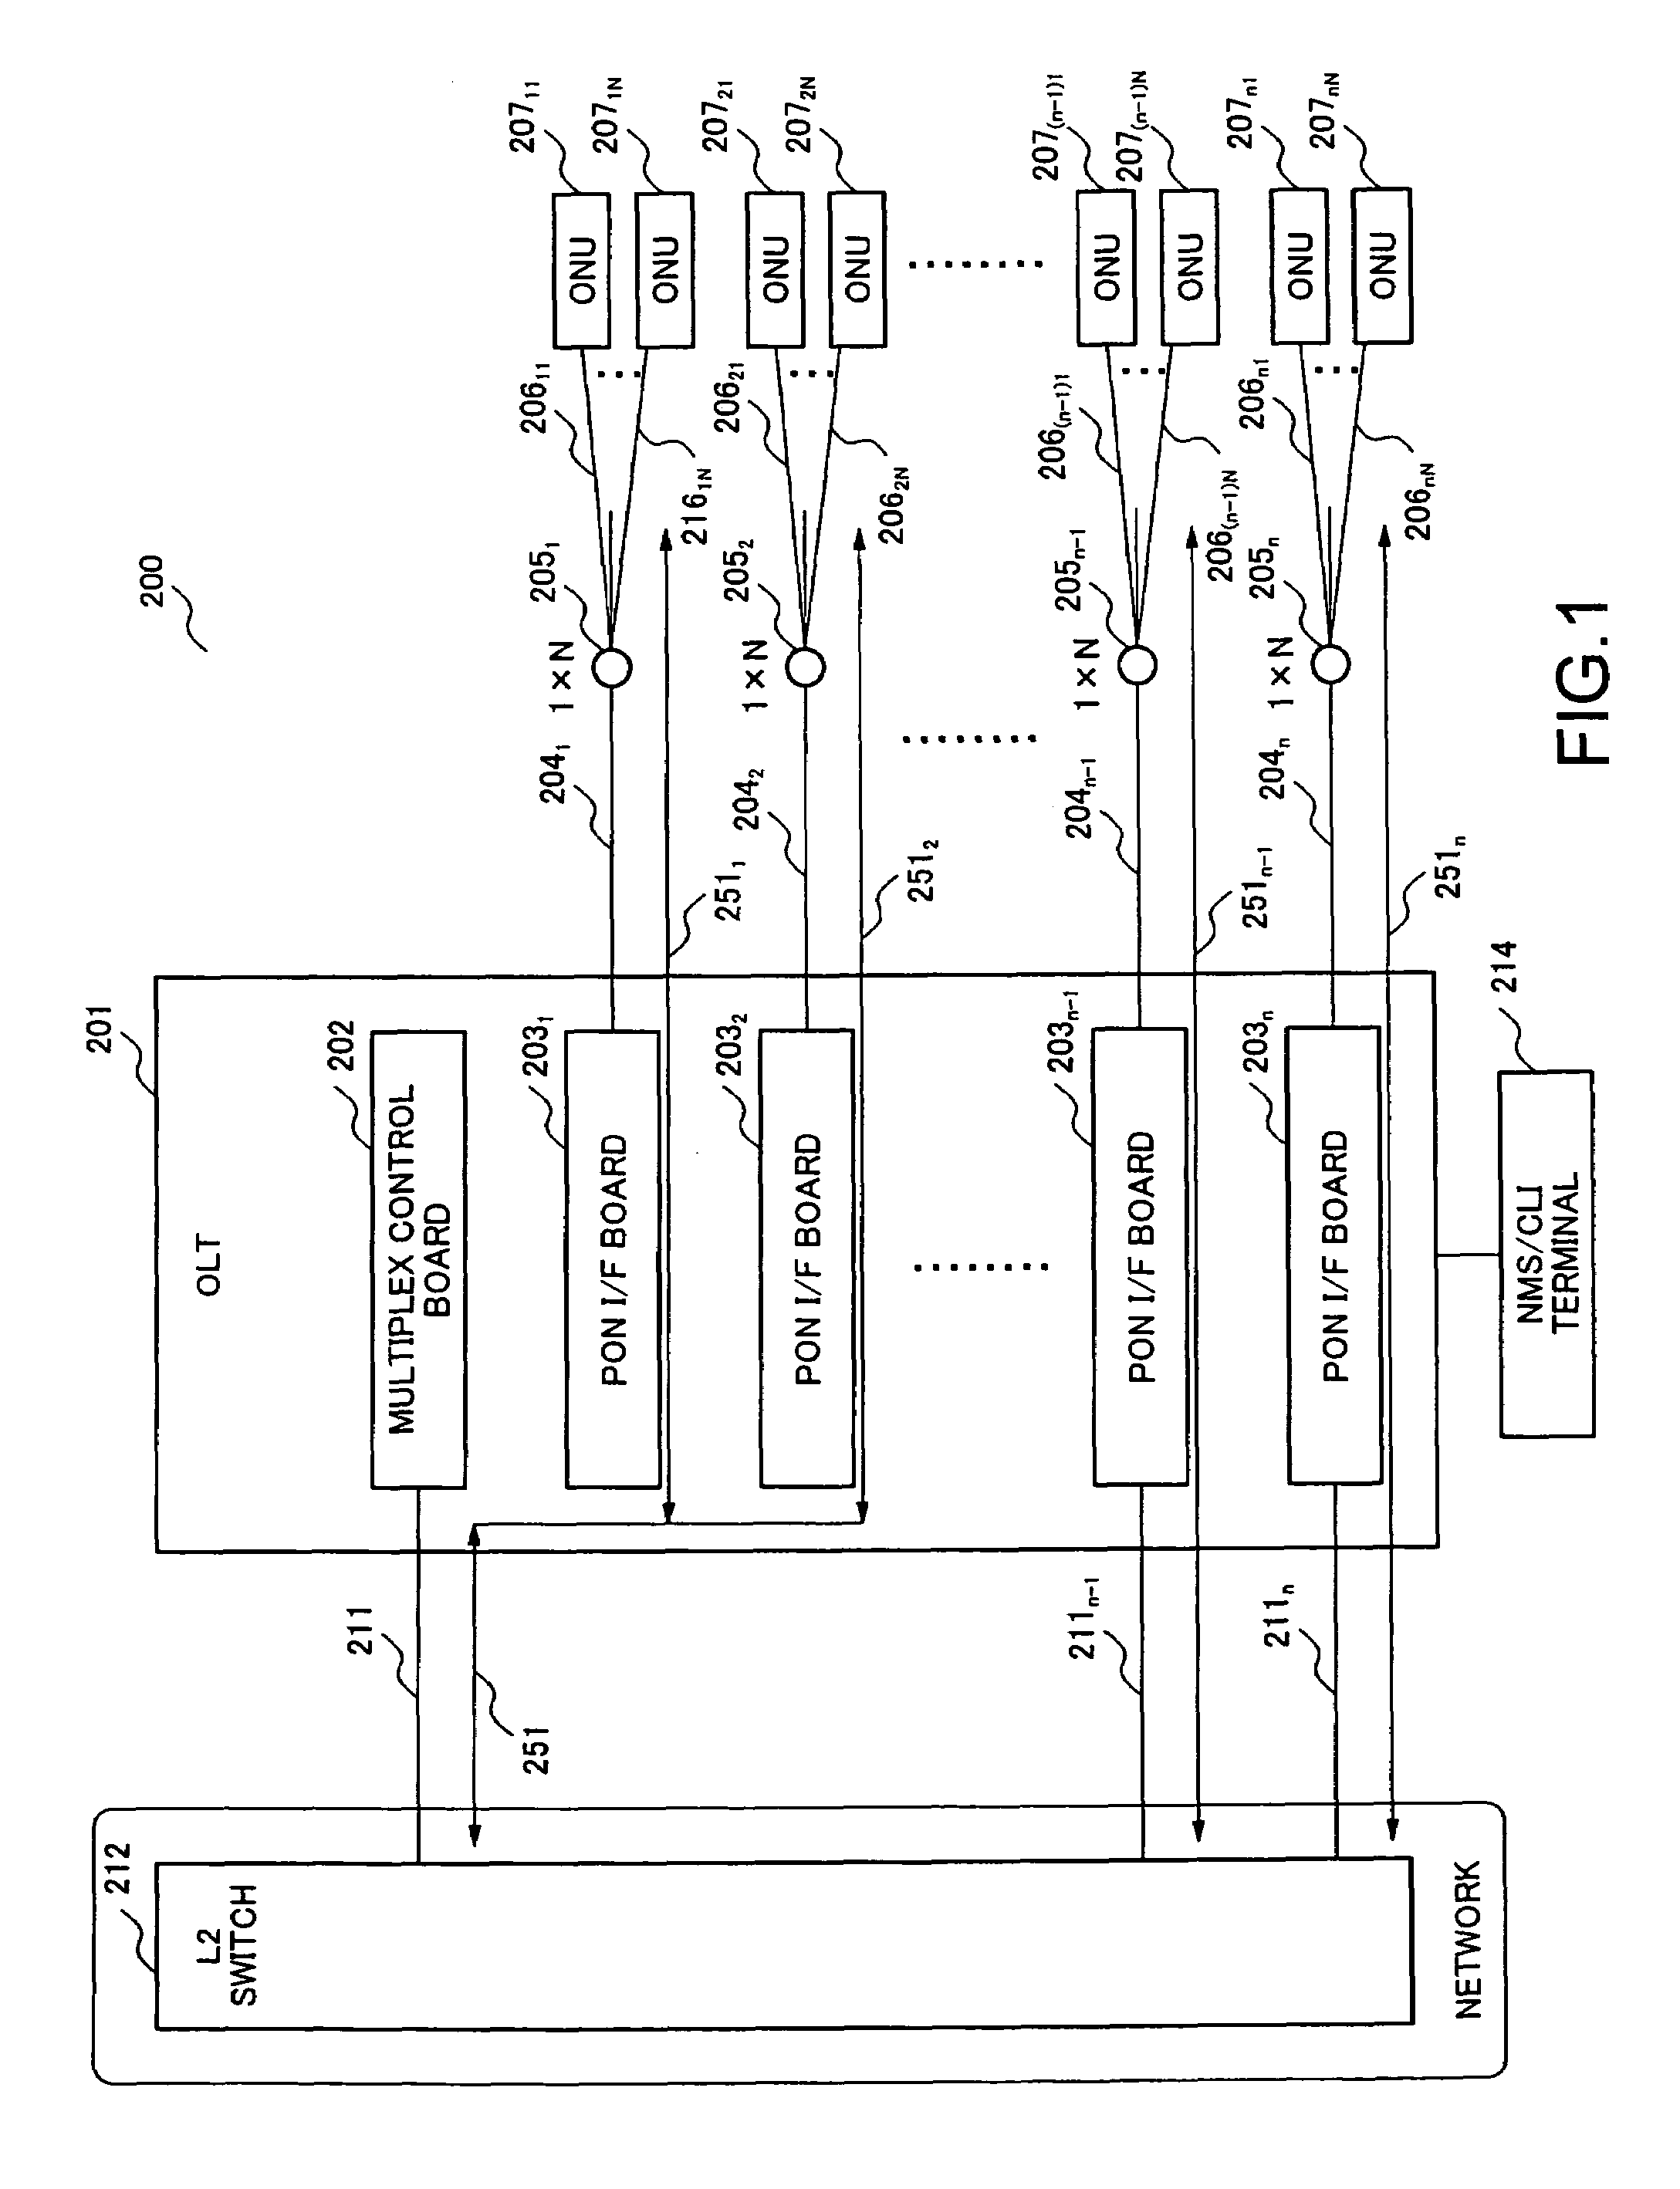 Optical access network apparatus and data signal sending method therefor